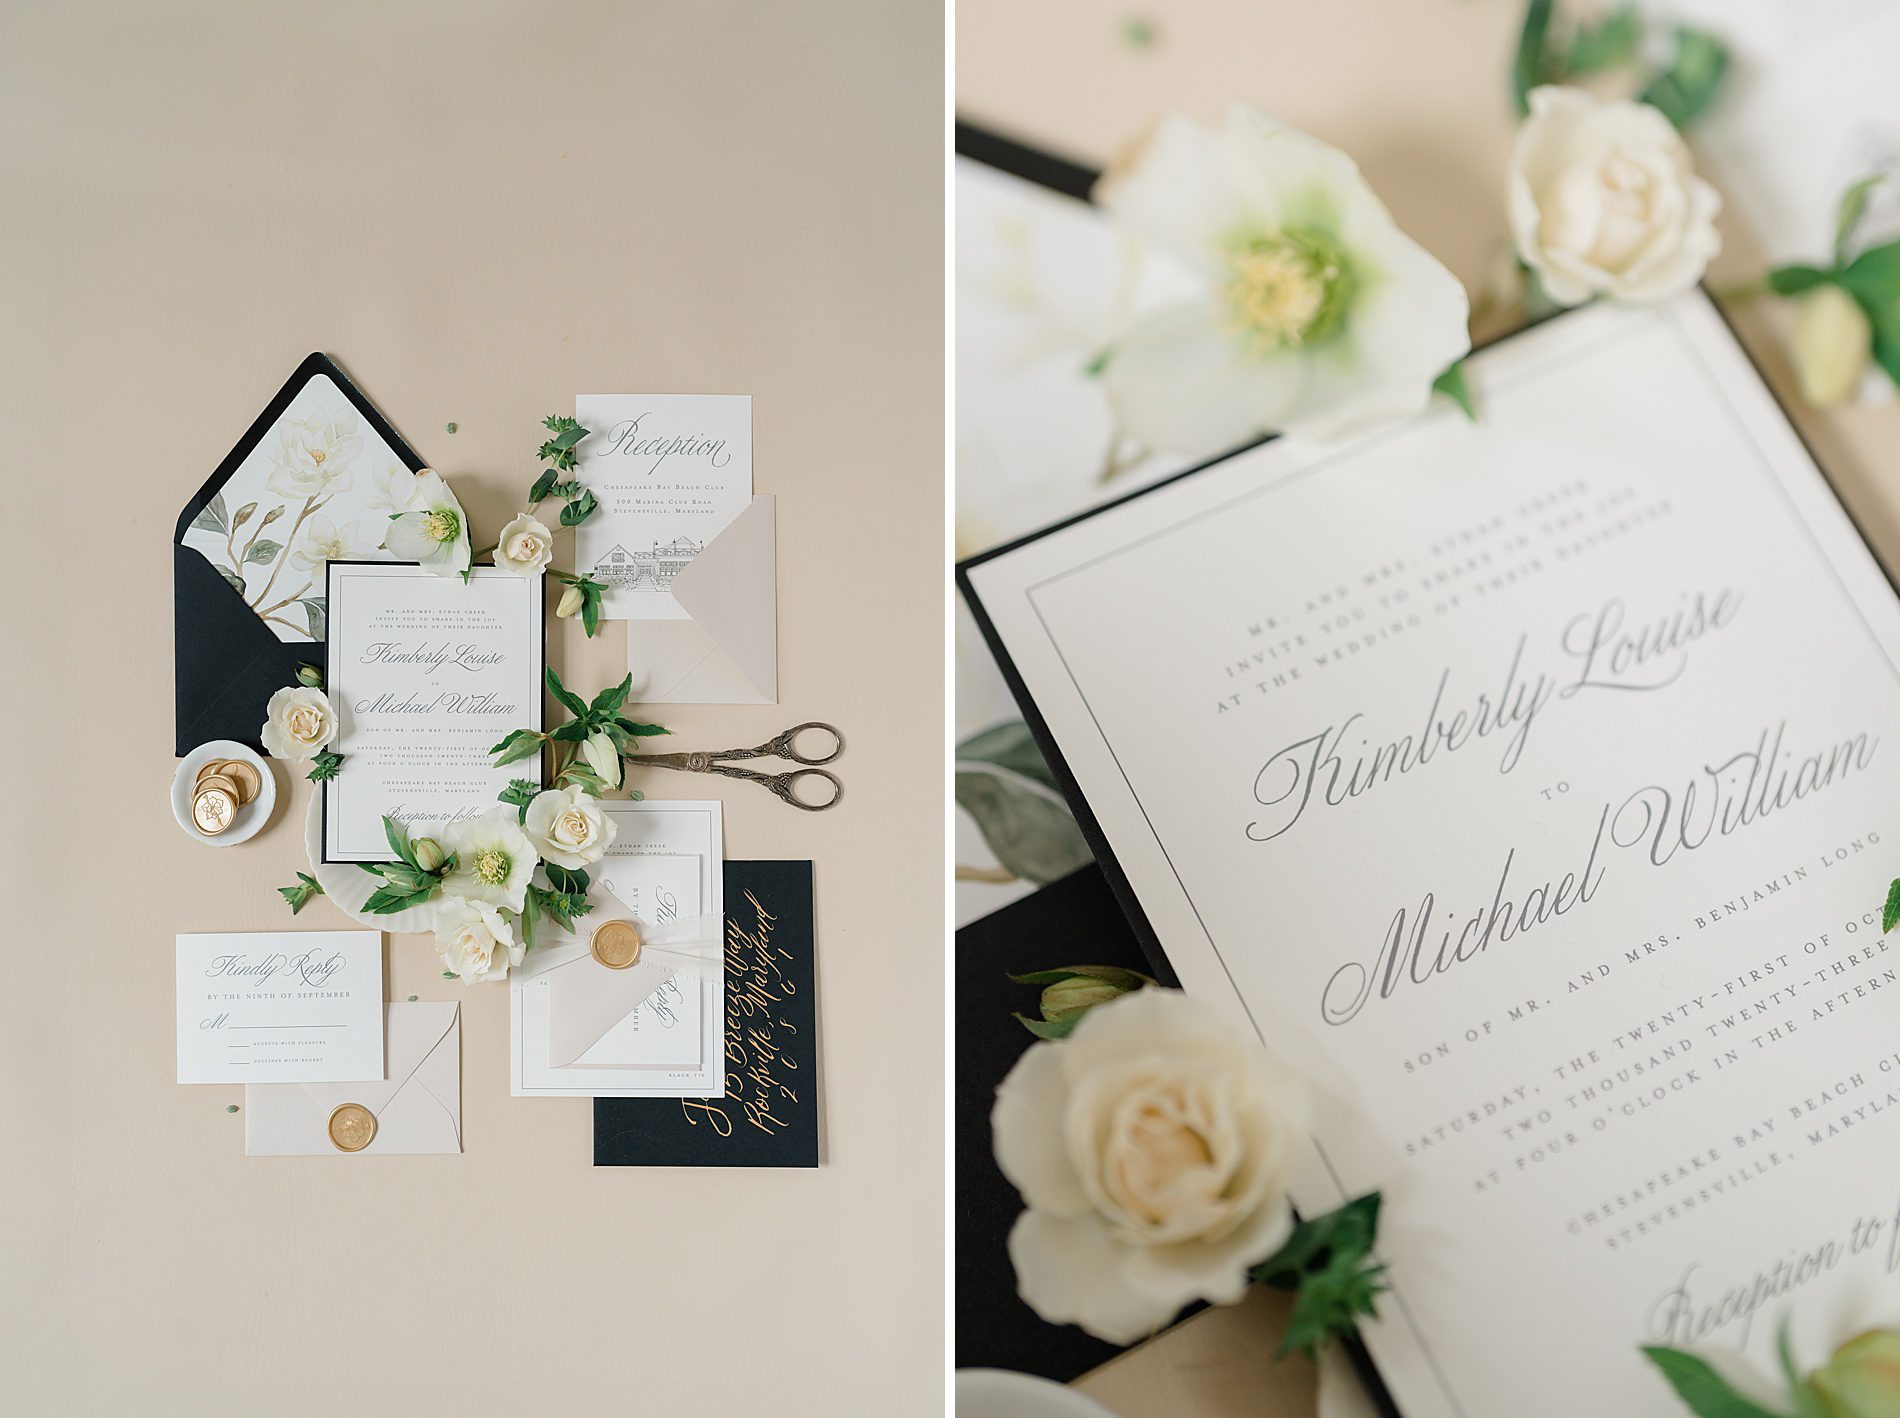 stationery design branding photography by Amber Dawn Photography 